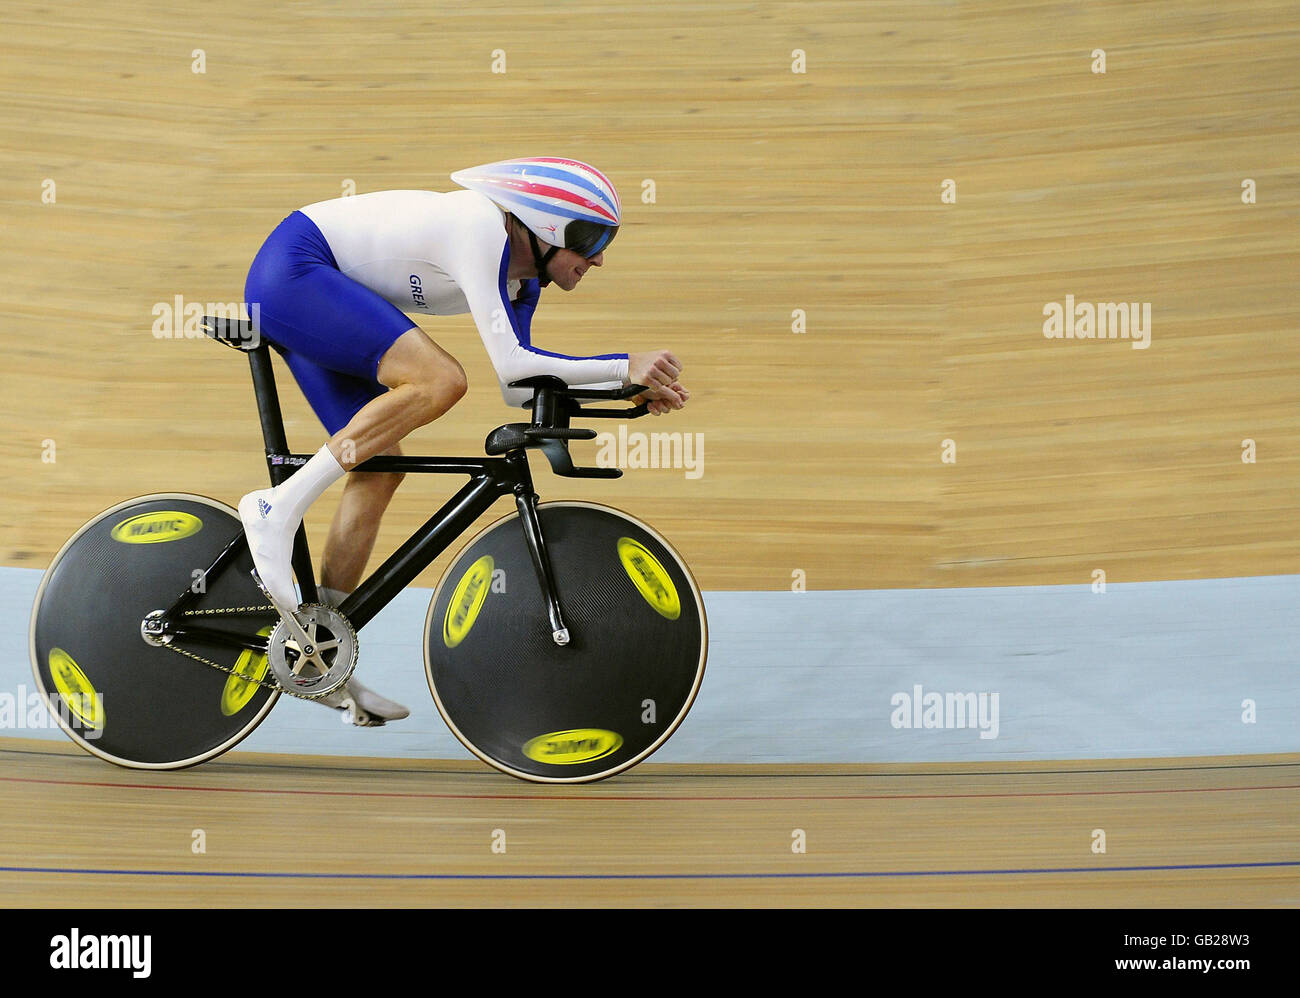 Great Britain's Bradley Wiggins during his heat in the Men's Individual Pursuit at the Laoshan Velodrome during the 2008 Beijing Olympic Games in China. Stock Photo